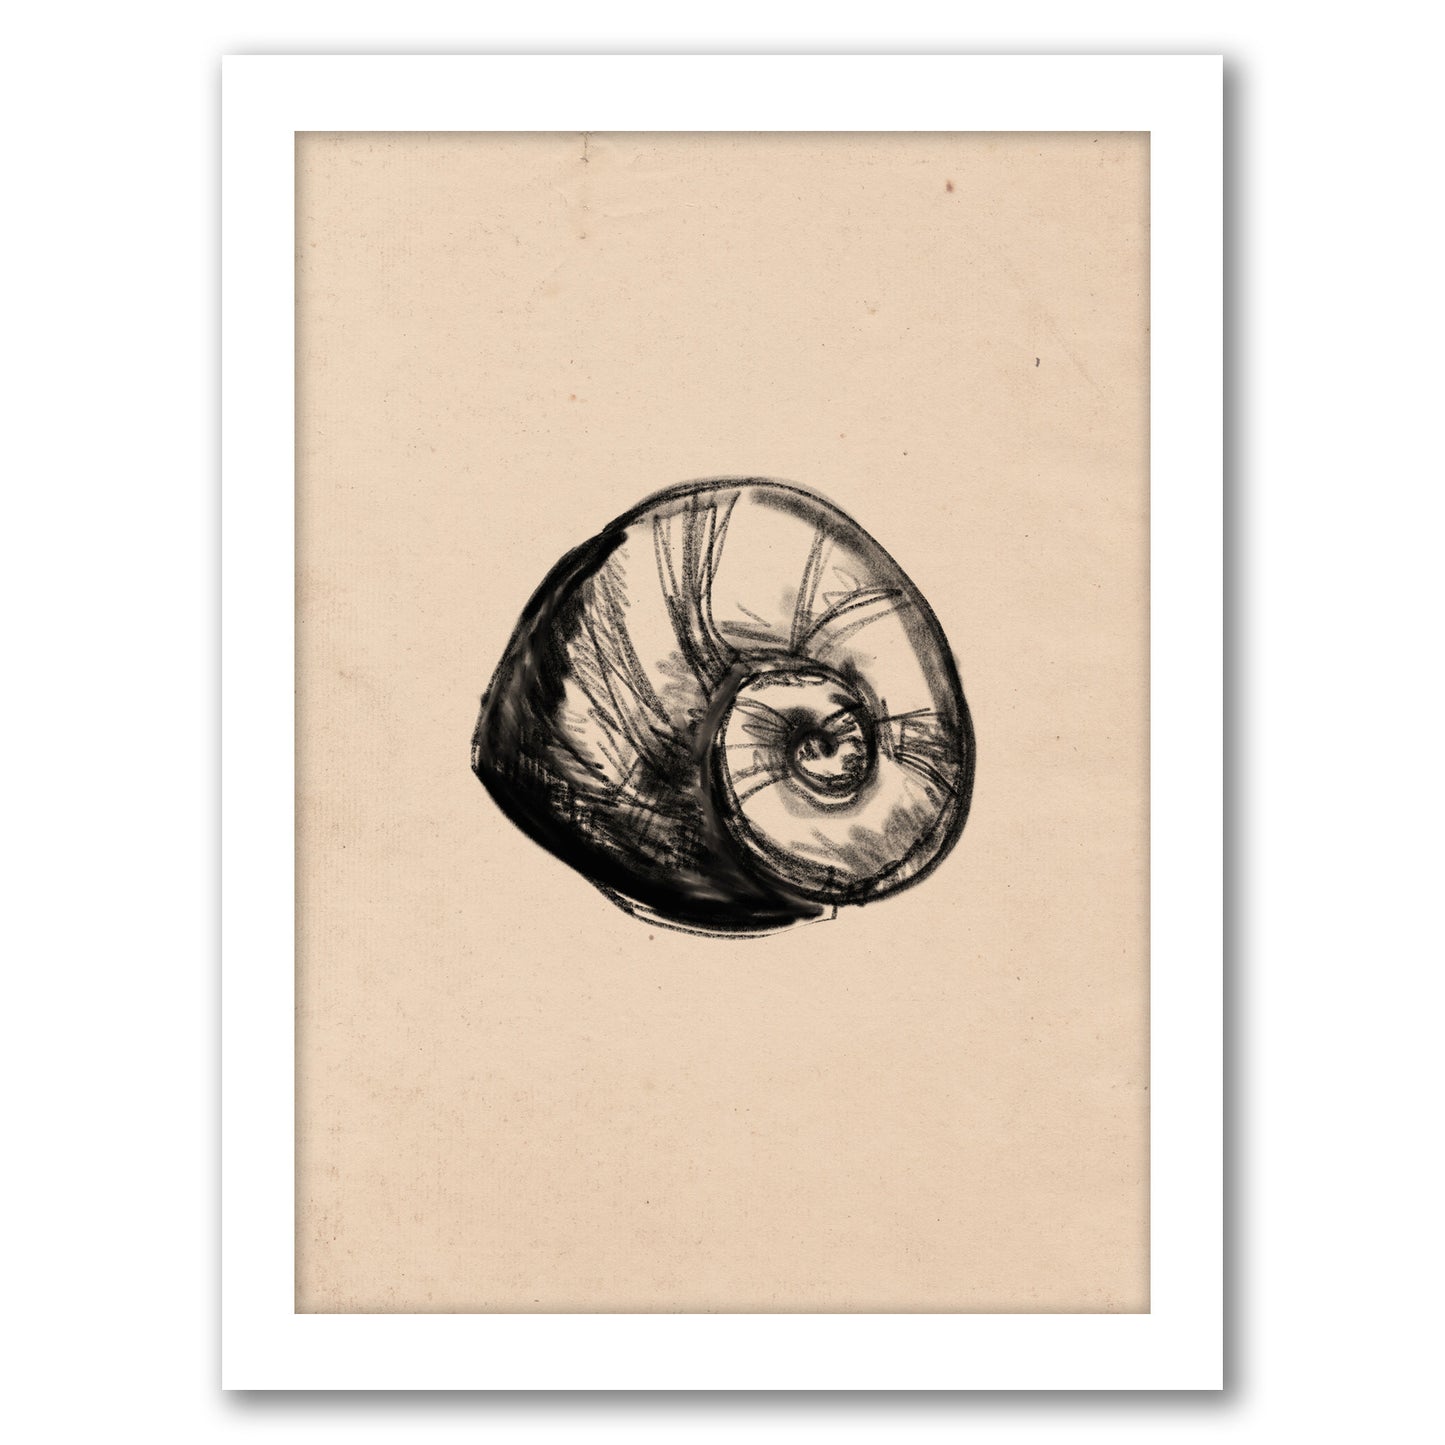 Illustrated Sea Shell 2 by Jetty Home - Framed Print